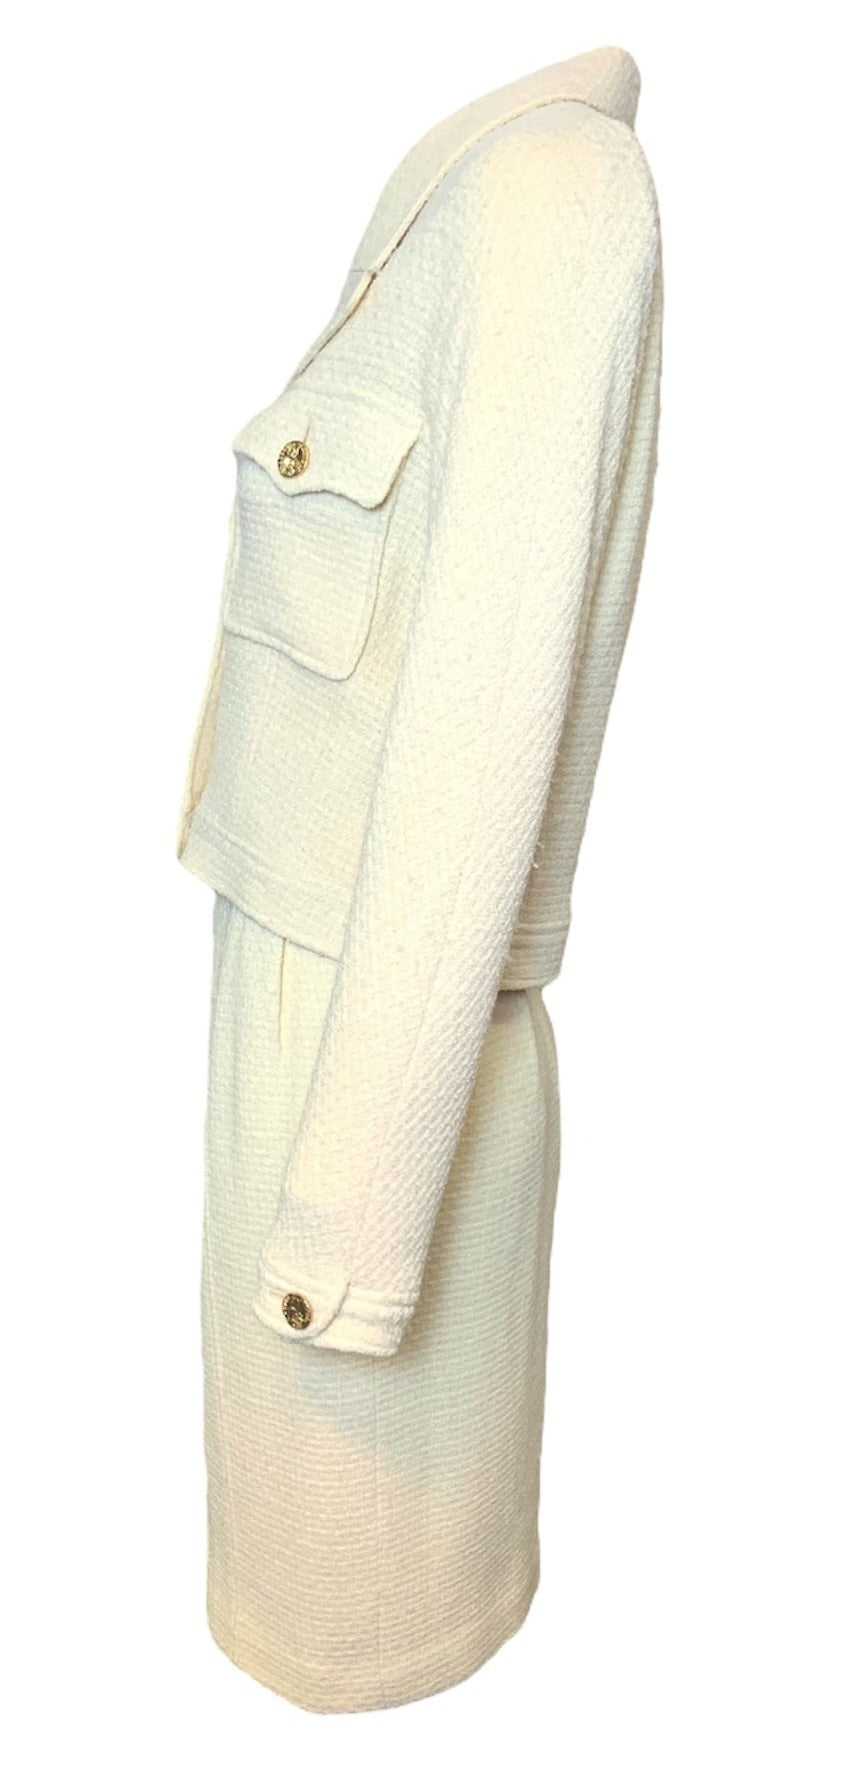  Chanel 90s Pale Yellow Nubby Wool Suit SIDE 2 of 8